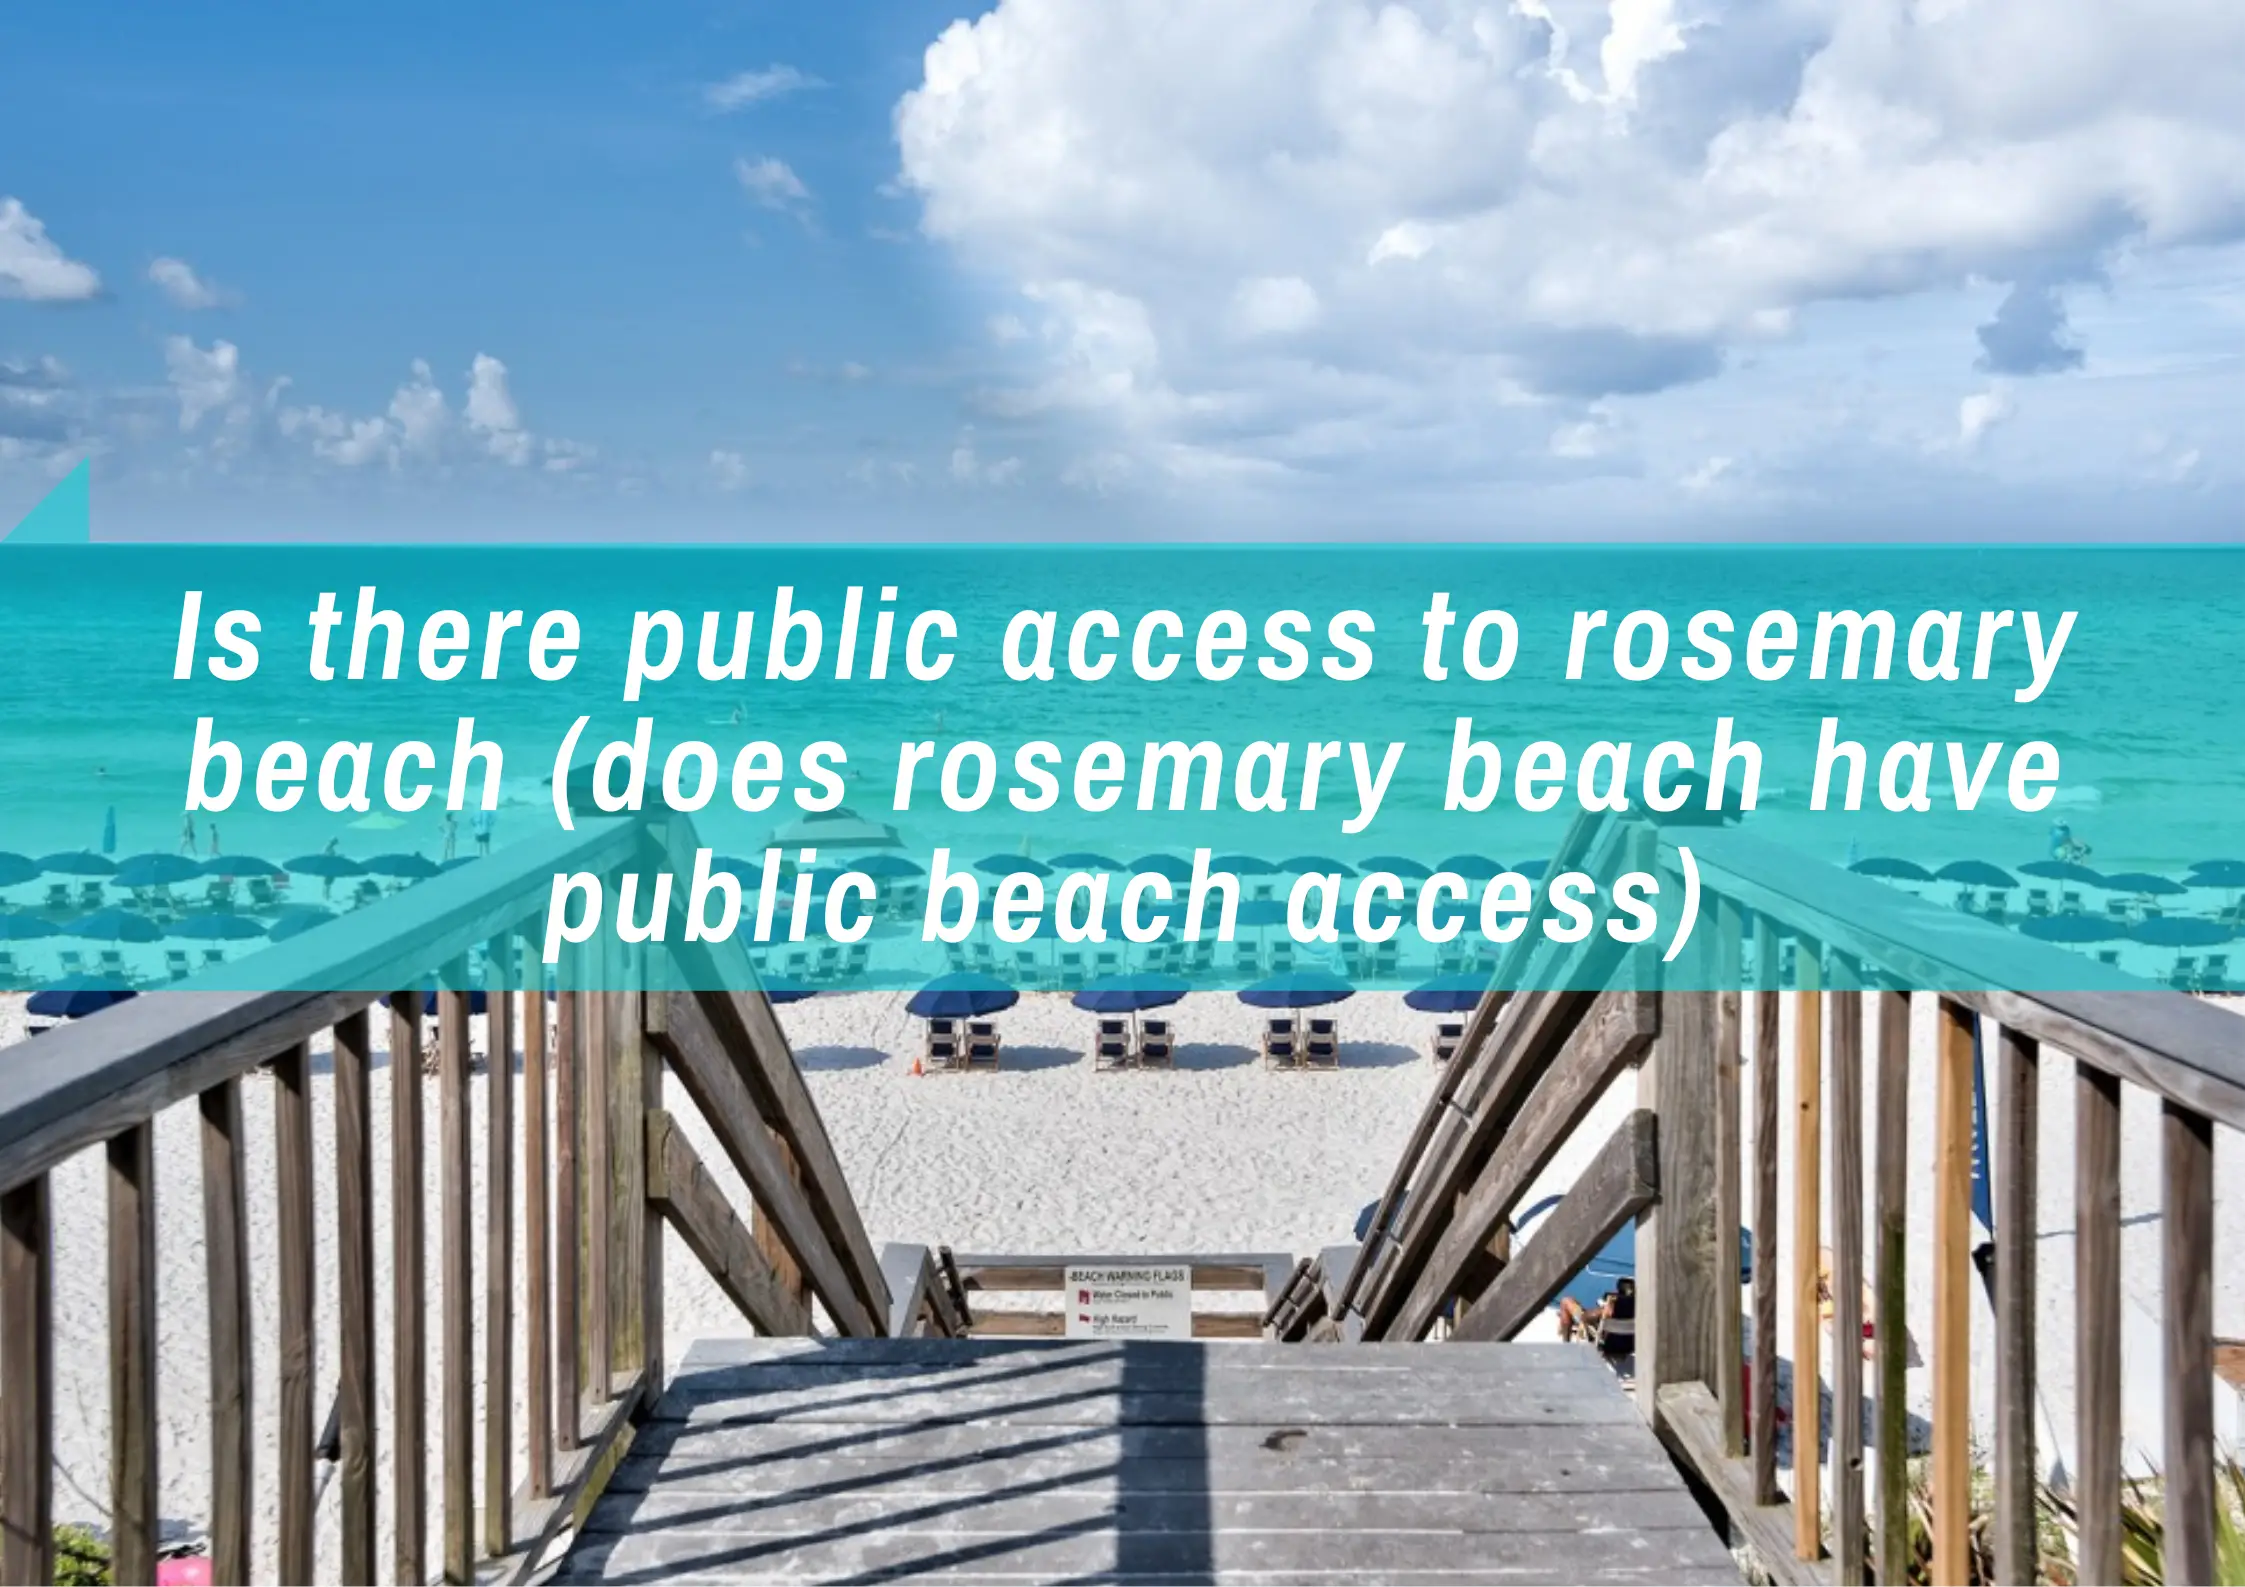 Is Rosemary beach open for public access?